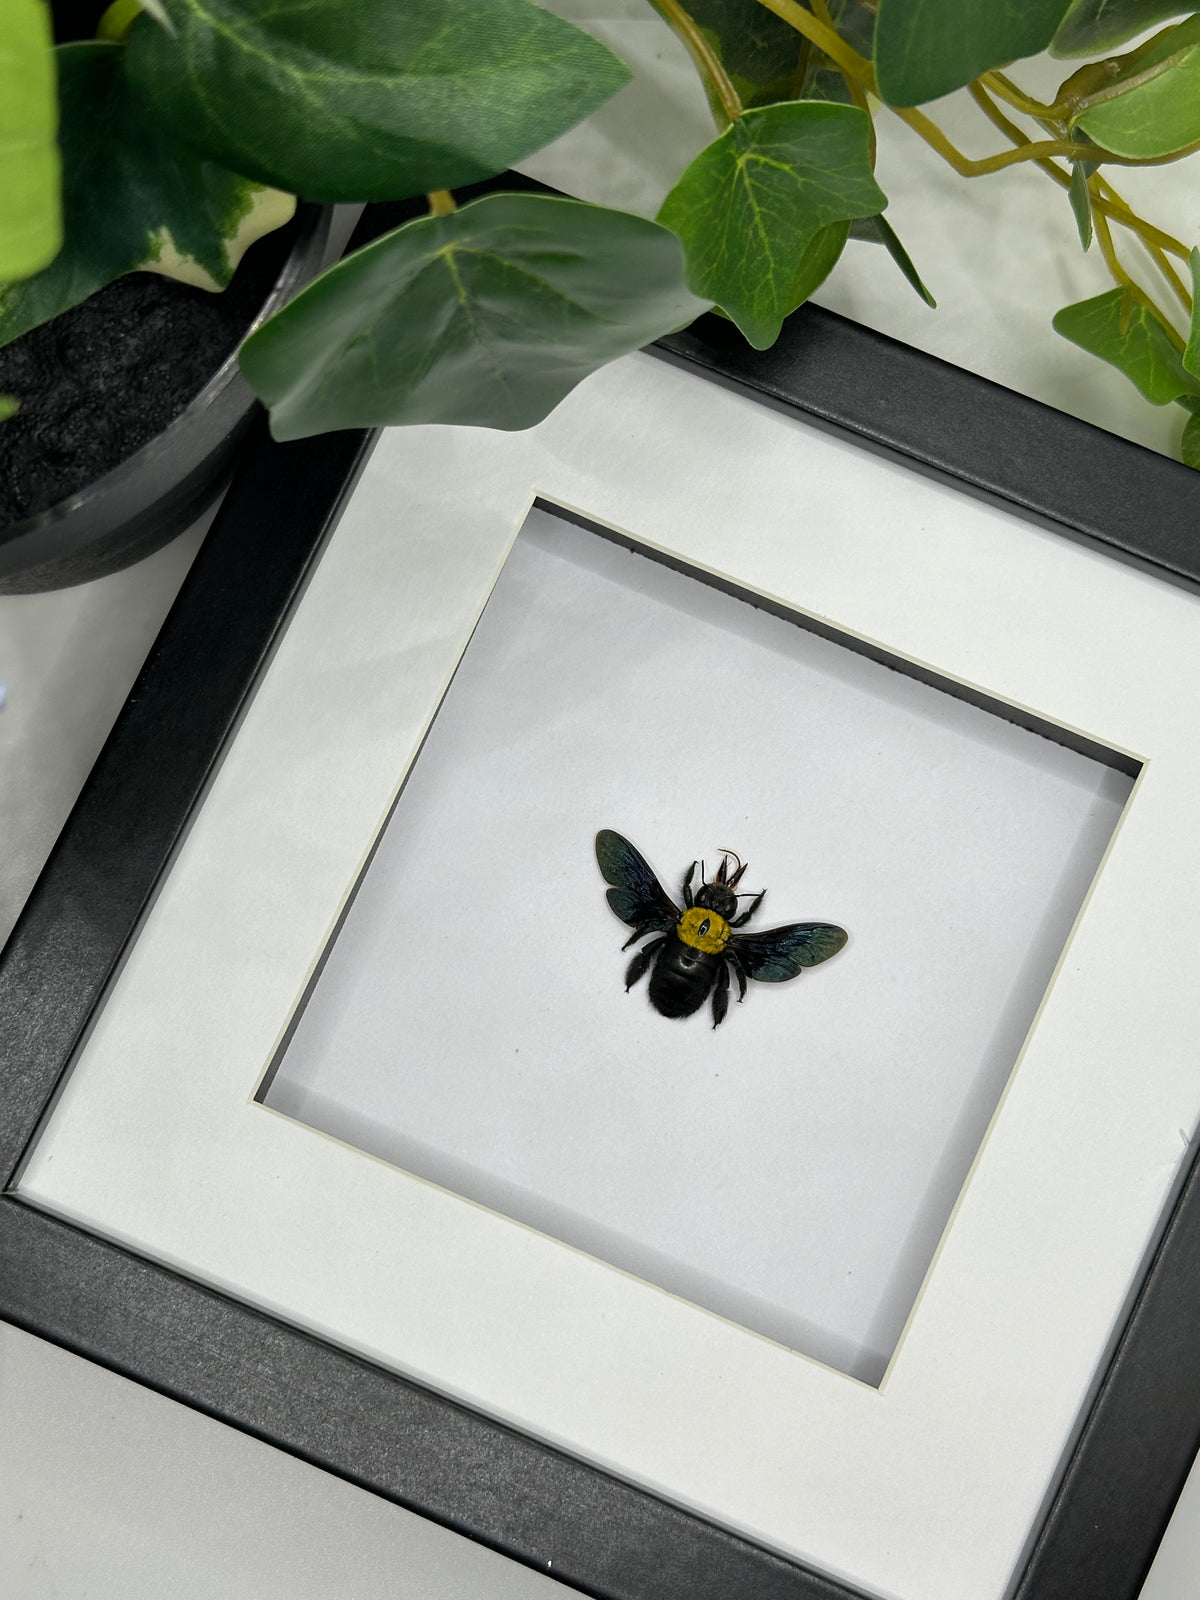 Black & Yellow Carpenter Bee / Xylocopa Confusa in a frame